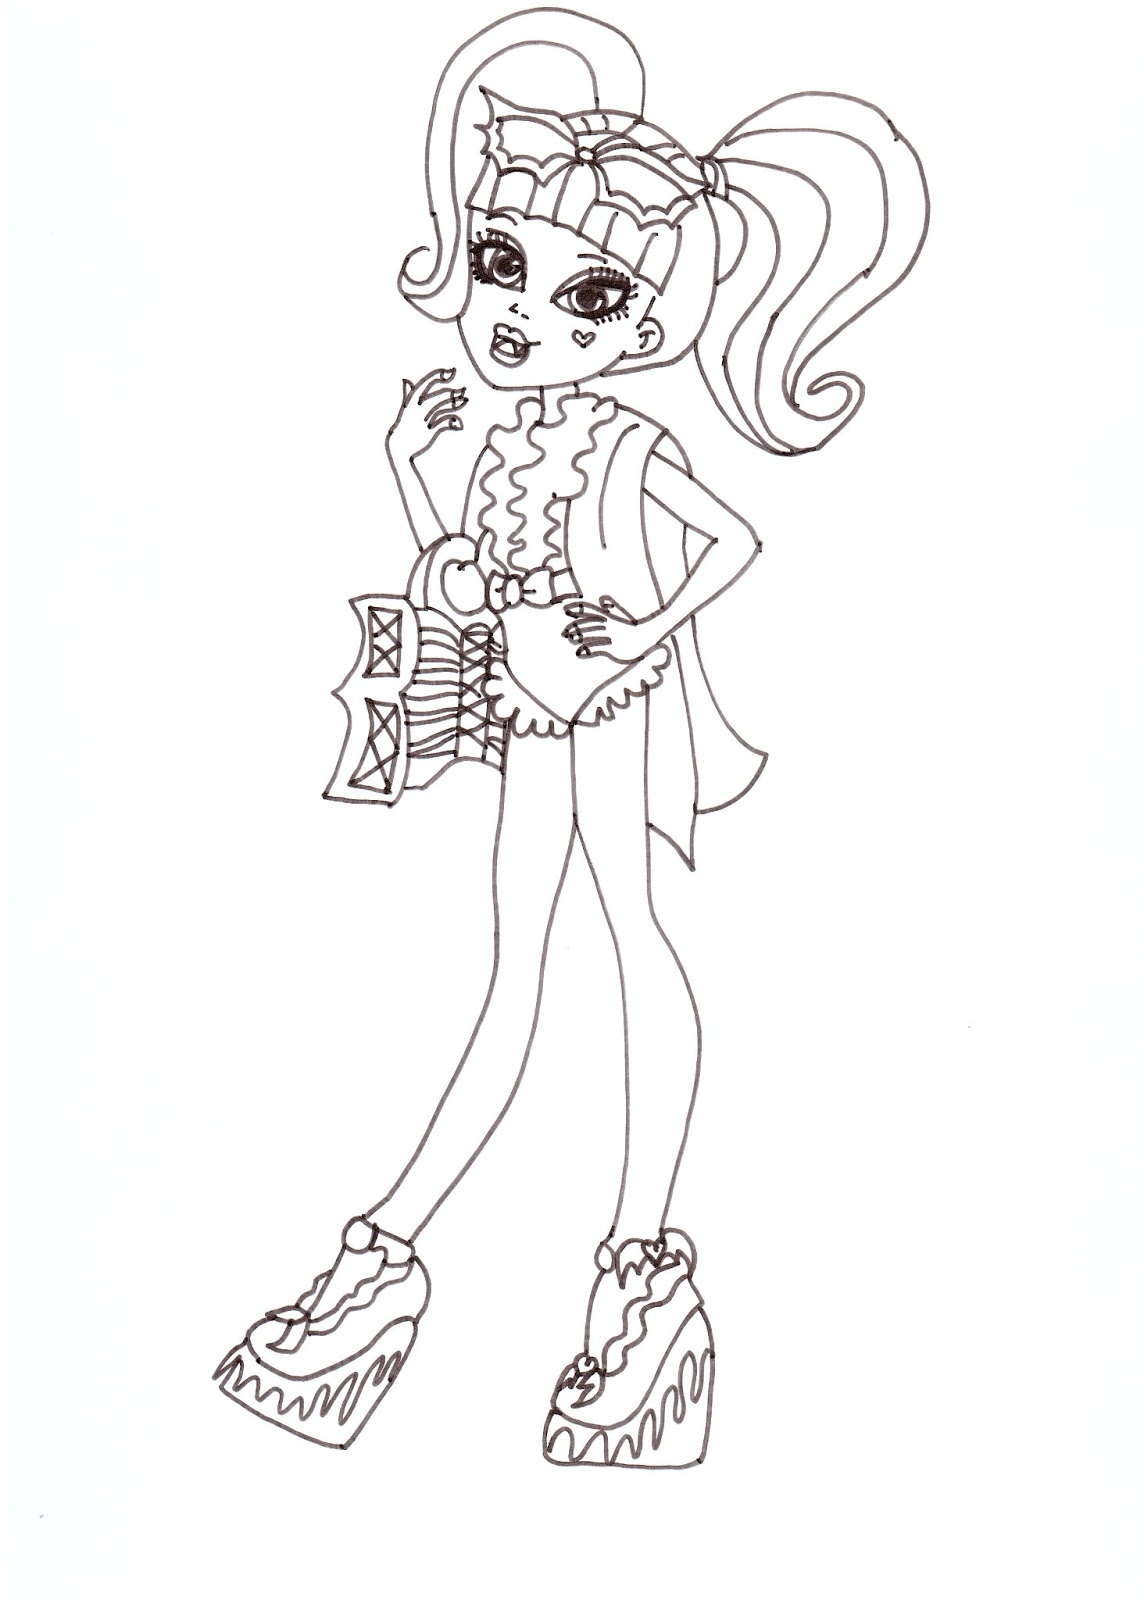 Download Free Printable Monster High Coloring Pages: Draculaura Swim Class Coloring Sheet